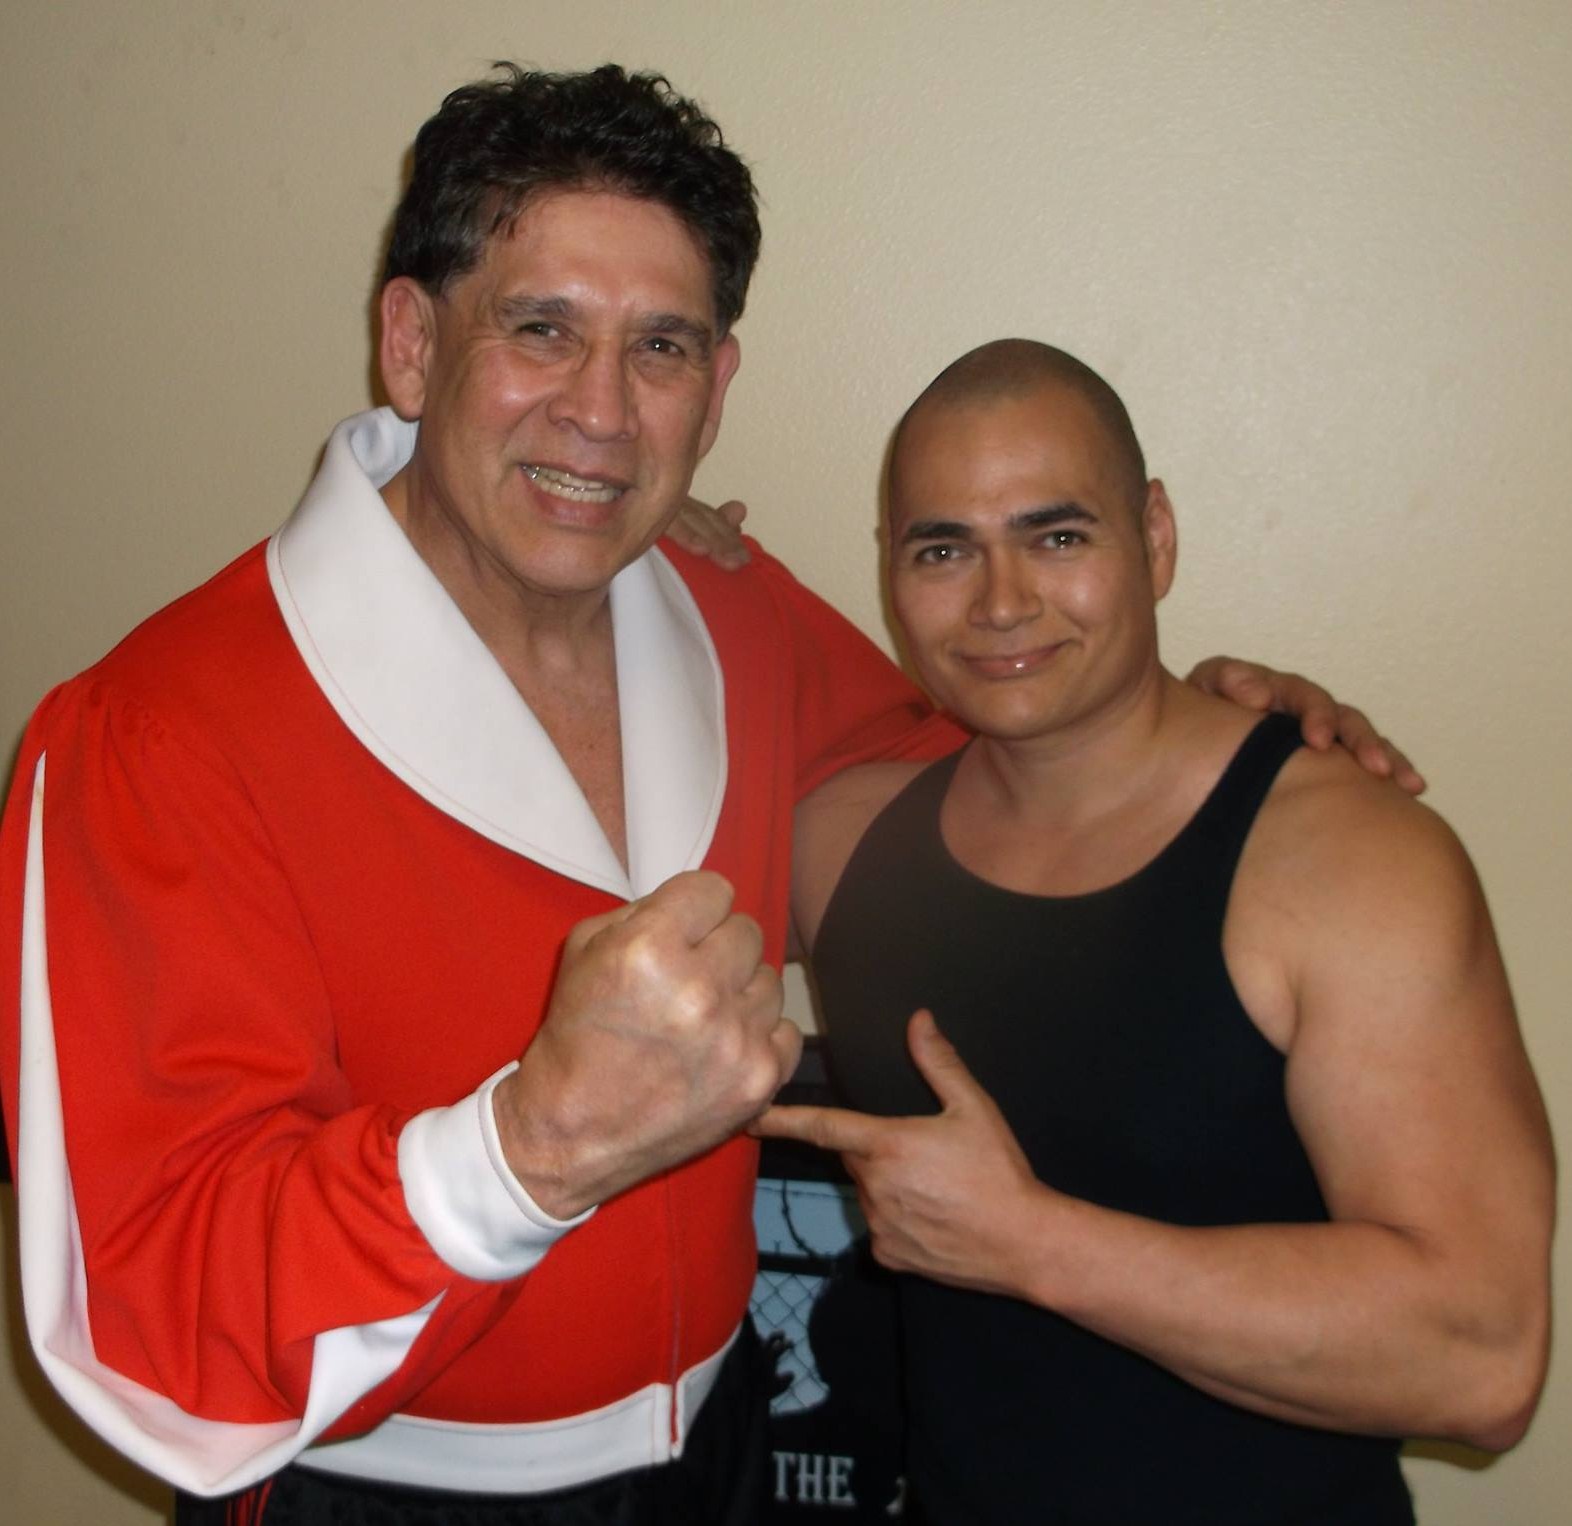 Working with the living legend and former WWF Superstar Tito Santana.